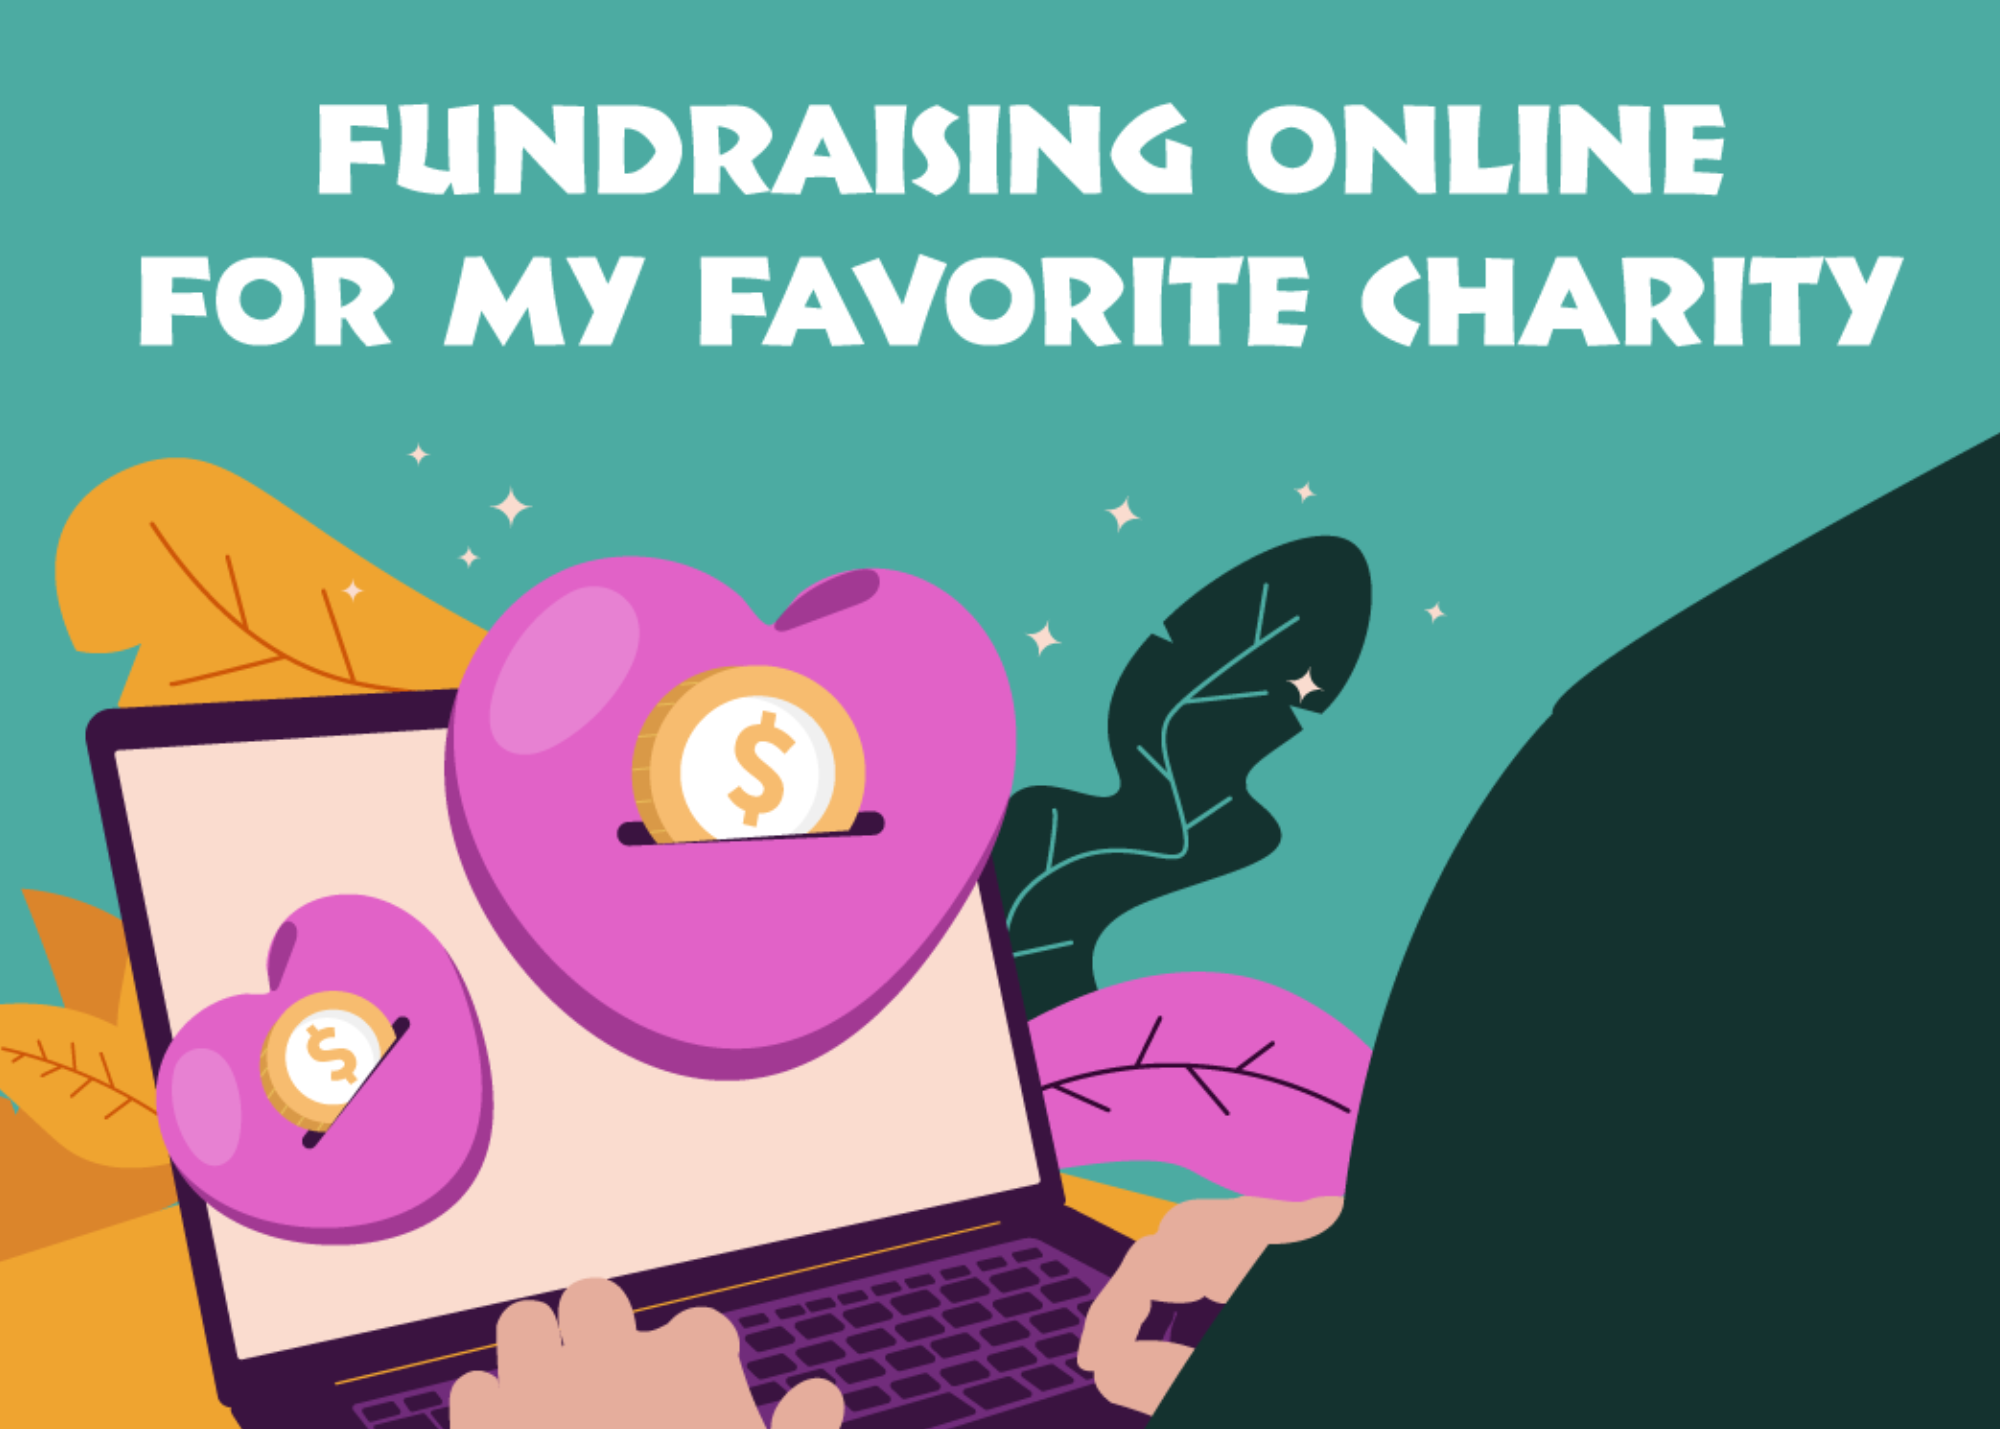 A follower on Facebook and Instagram can fundraise